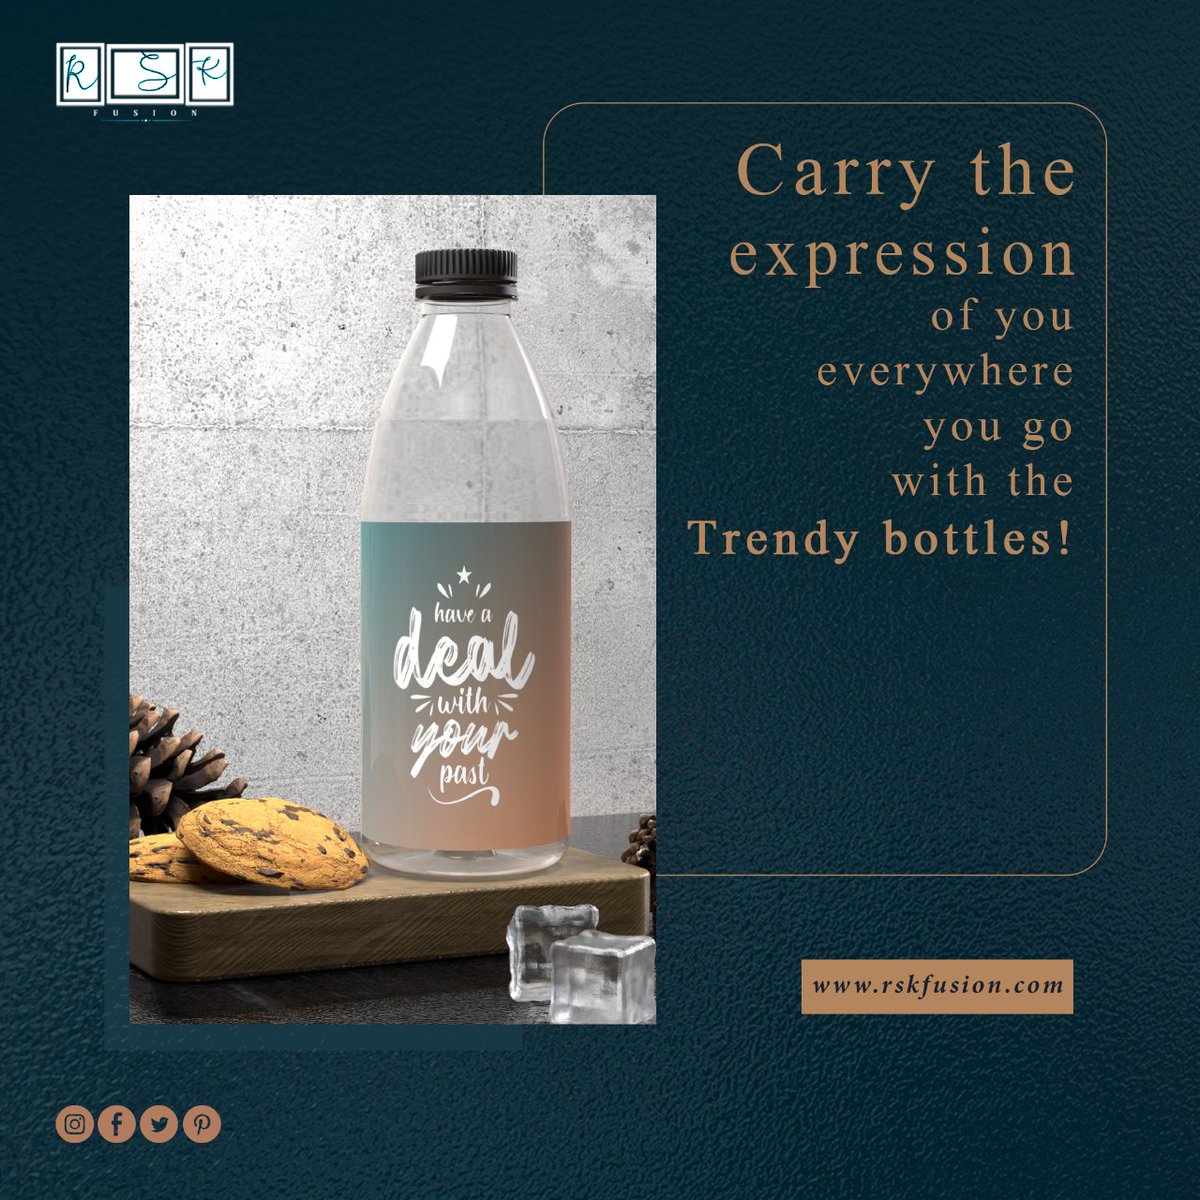 Get the collection of the best-customized bottles at #RSKfusion!

Shop now at rskfusion.com  

#rskfusion #bottle #drinks #bottleart #gifts #waterbottle #water #bottledecor #bottlecraft #waterbottles #printables #printableart #personalizebottled #artproducts #Customized